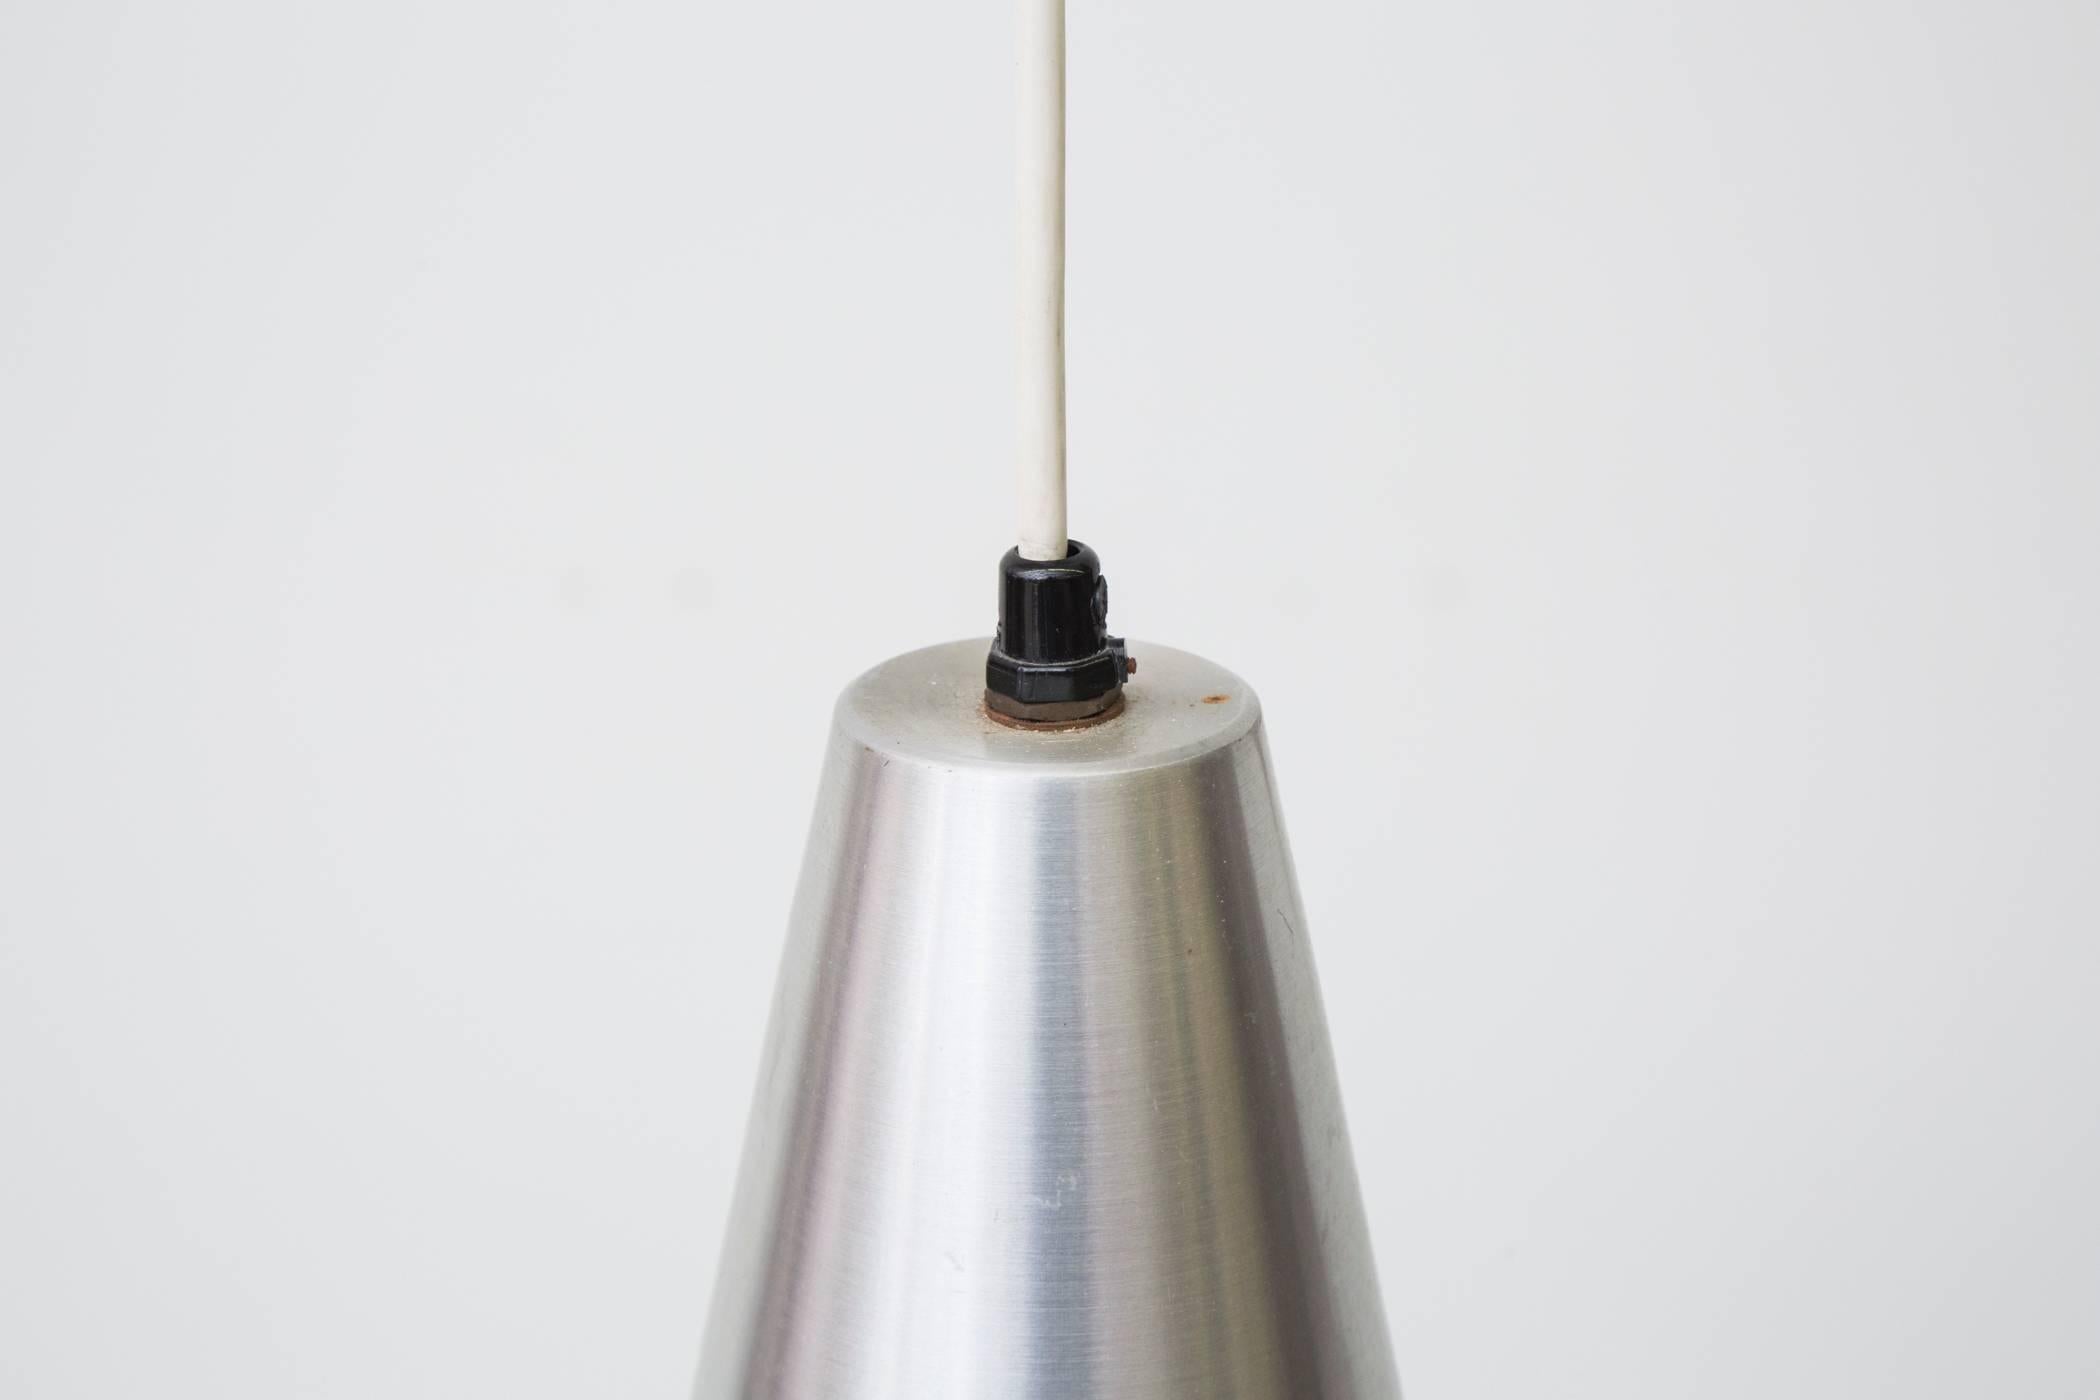 Large spun aluminum cone pendant with black band. Emits beautiful diffused light. Original condition with some signs of wear consistent with its age and usage.